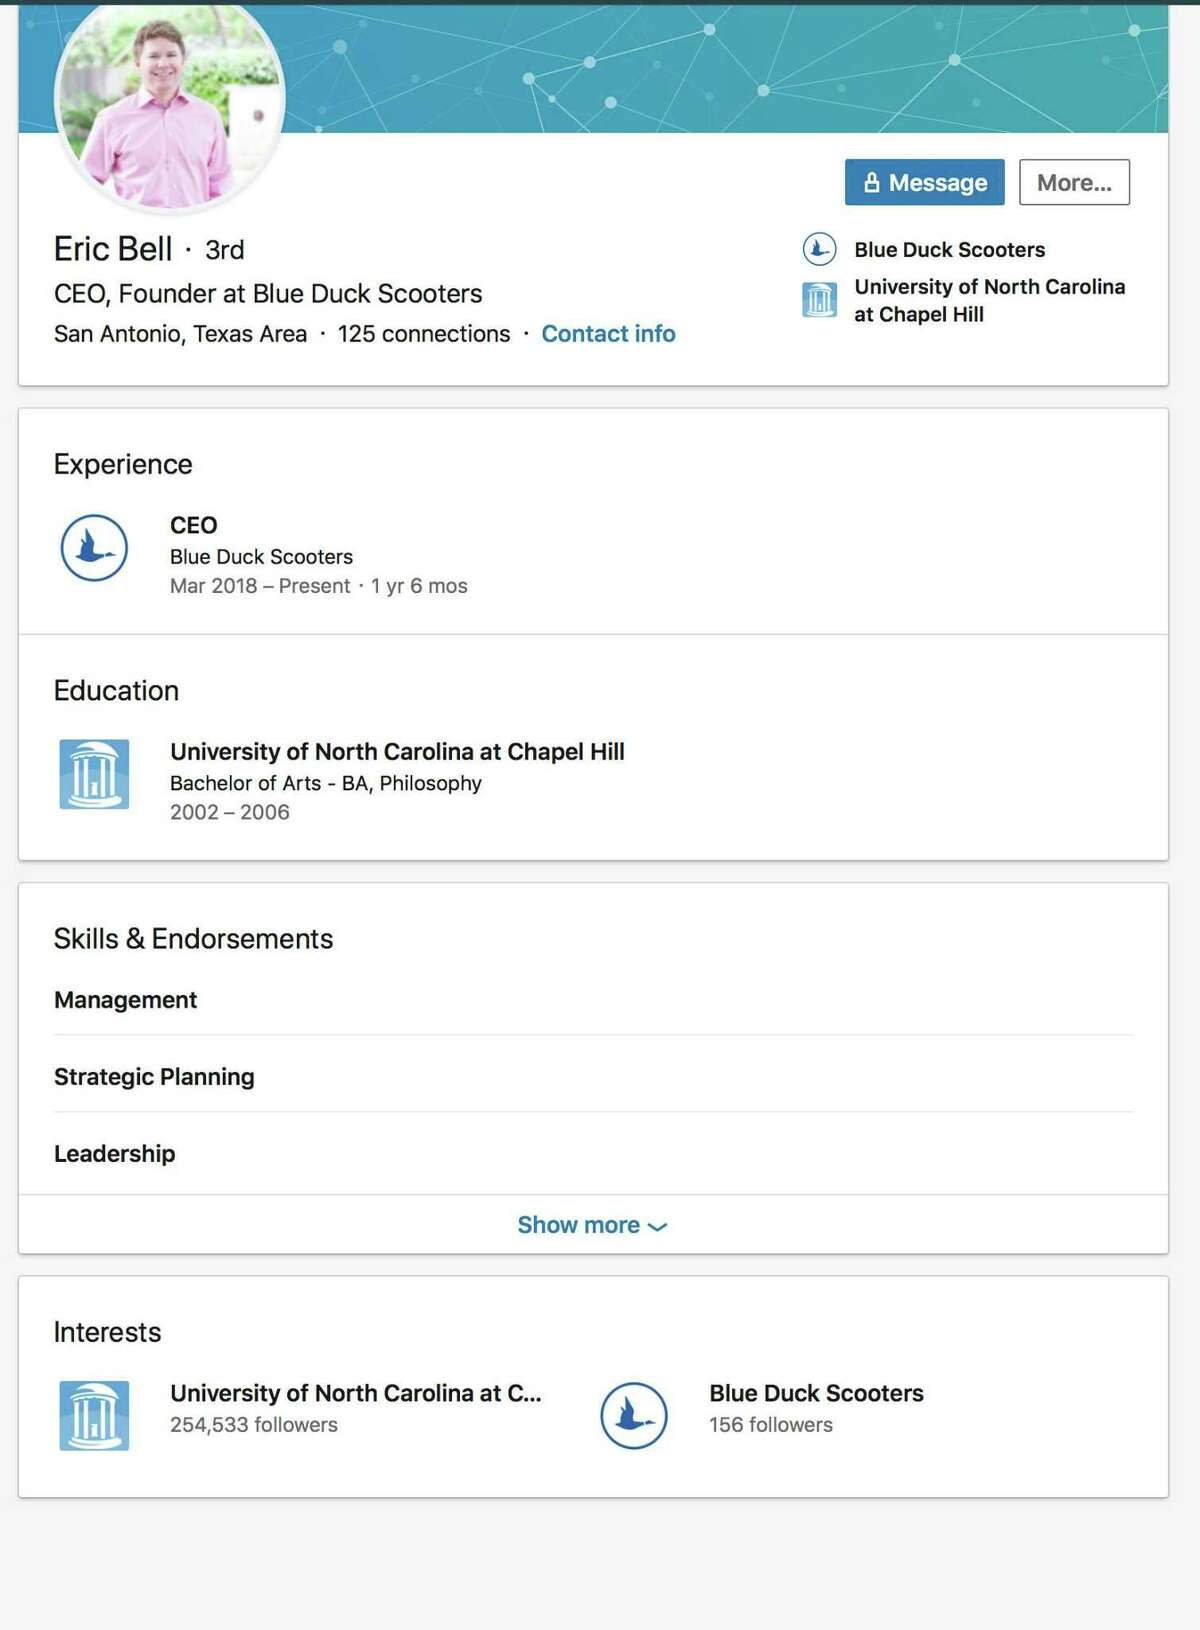 Eric Bell claimed to reporters and put on his LinkedIn page that he received a bachelor's in philosophy from The University of North Carolina at Chapel Hill. The registrar's office there has no record that he ever attended the school. After several inquiries to Bell went unanswered, all mention of the degree and UNC were removed from the page.